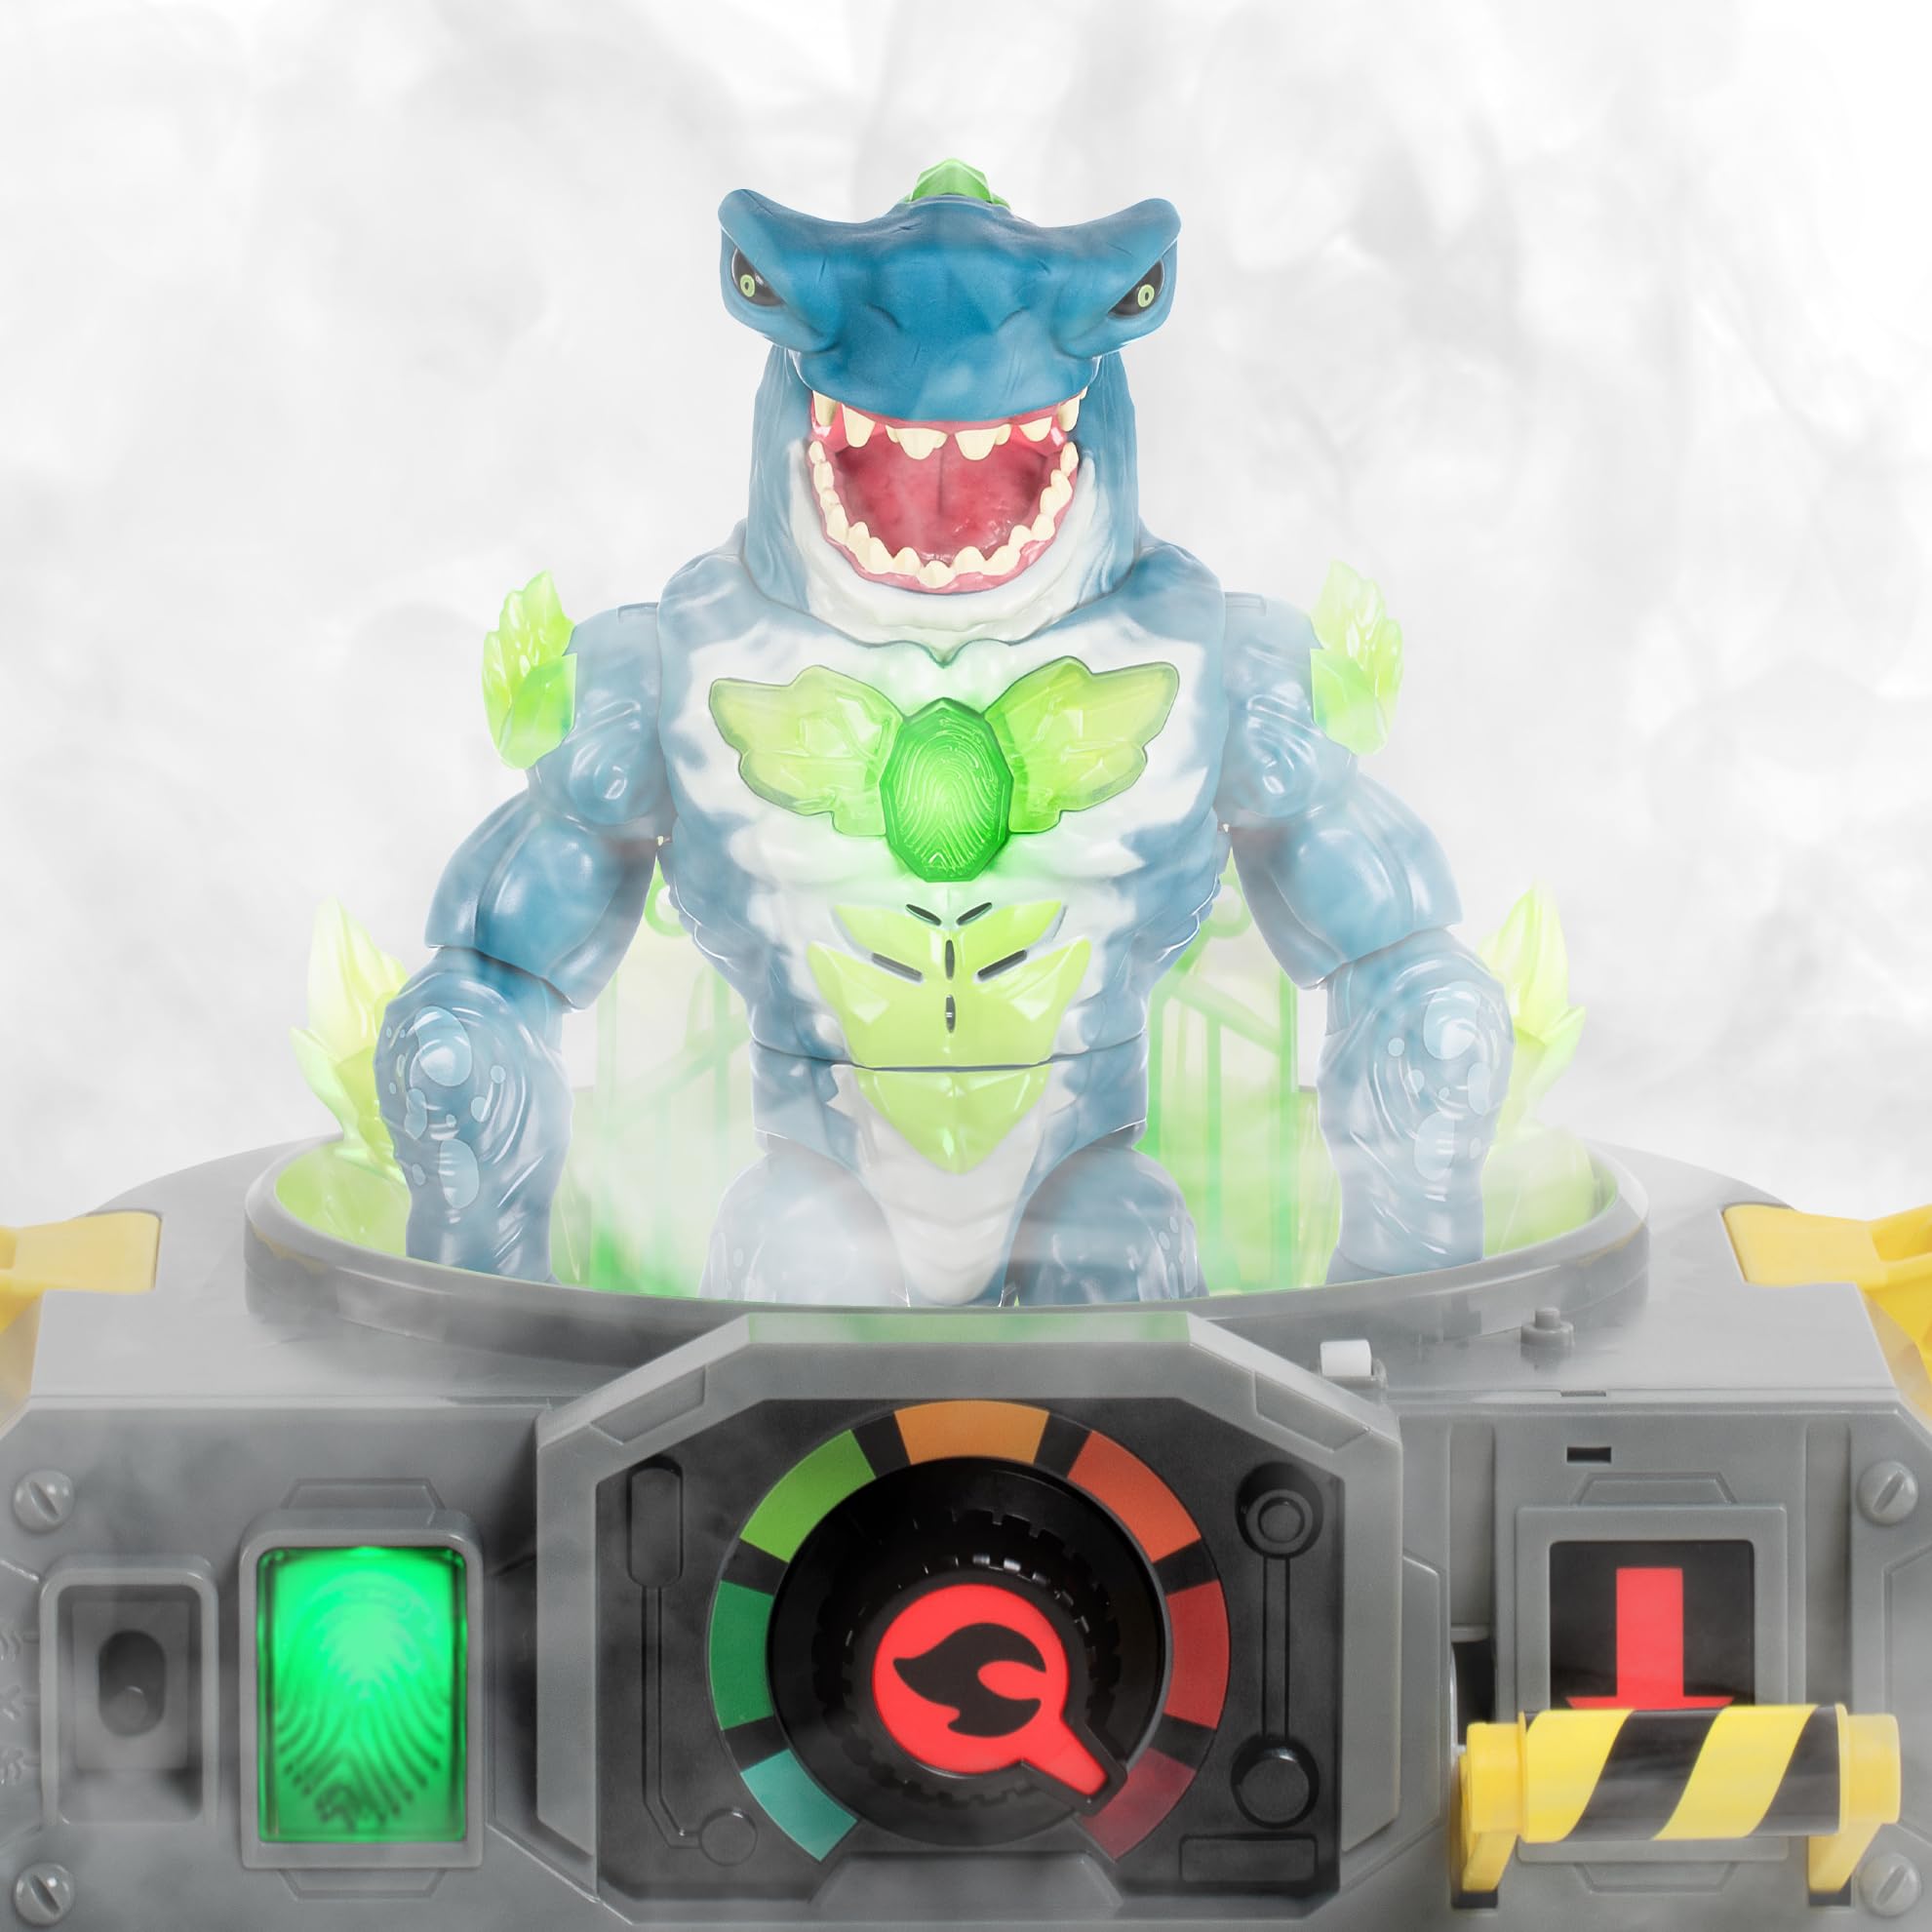 Beast Lab - 1 Pack Shark Beast Creator. Add Ingredients and Follow The Experiment's Steps to Create Your Beast! with Real Bio Mist and 80+ Lights, Sounds and Reactions - Styles May Vary